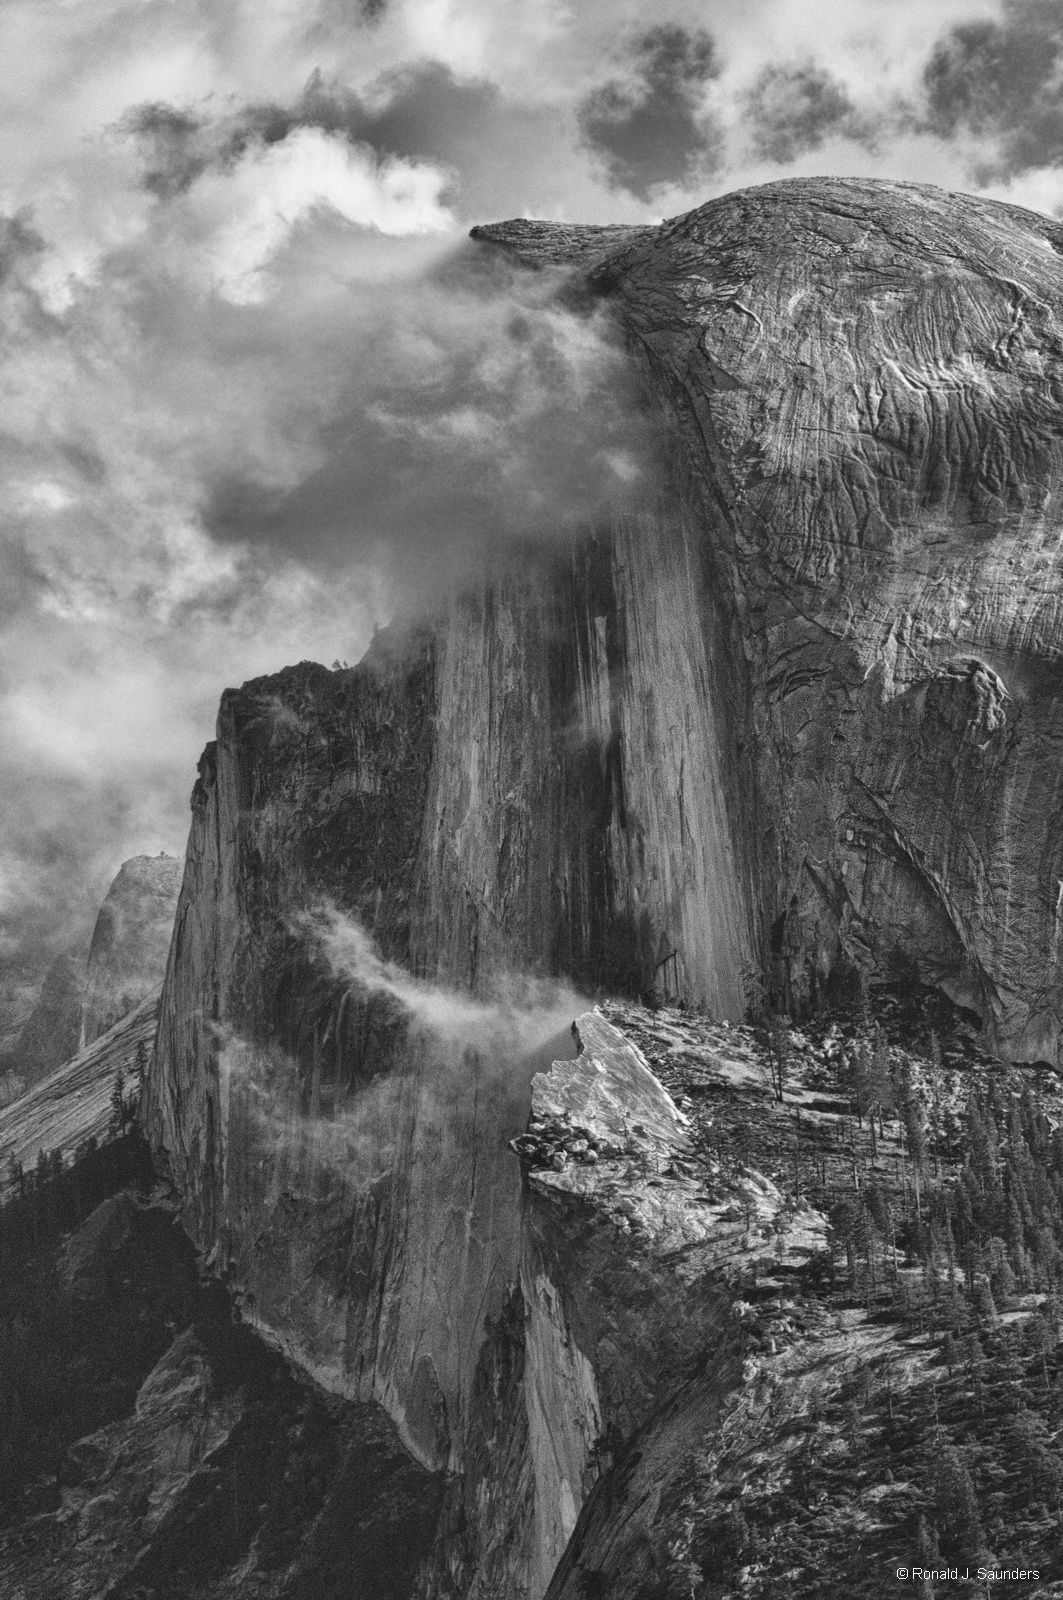 This is my first Yosemite print which was exhibited at the Center for Photographic Art in 2011.&nbsp;&nbsp; I have also had this...